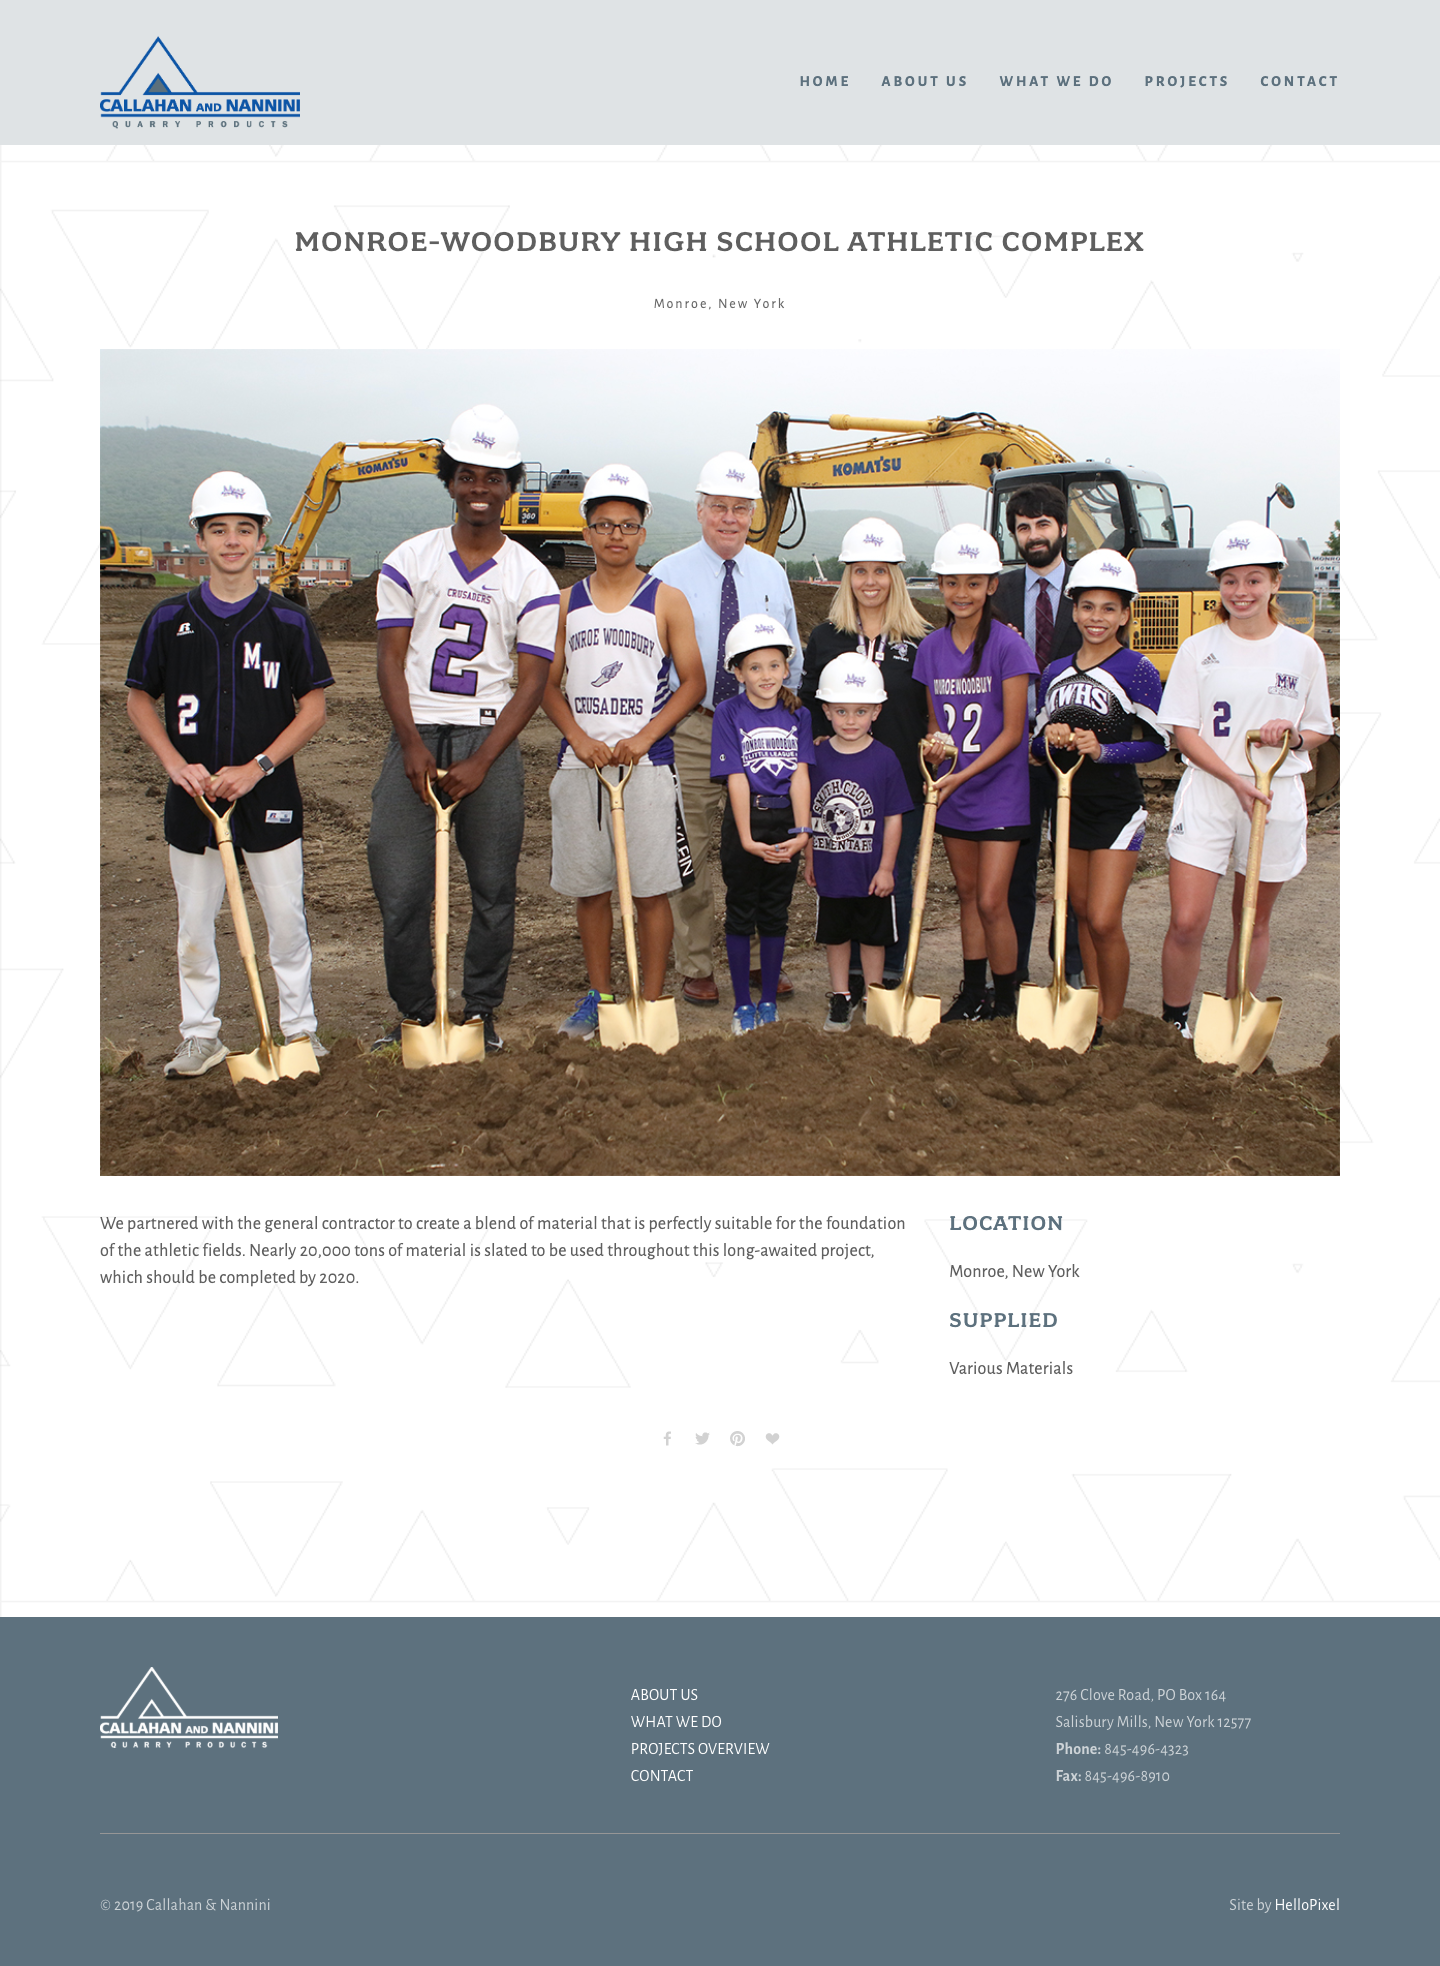 screencapture-plum-cymbals-f7jd-squarespace-projects-all-monroe-woodbury-high-school-athletic-complex-2019-08-14-10_53_23.png